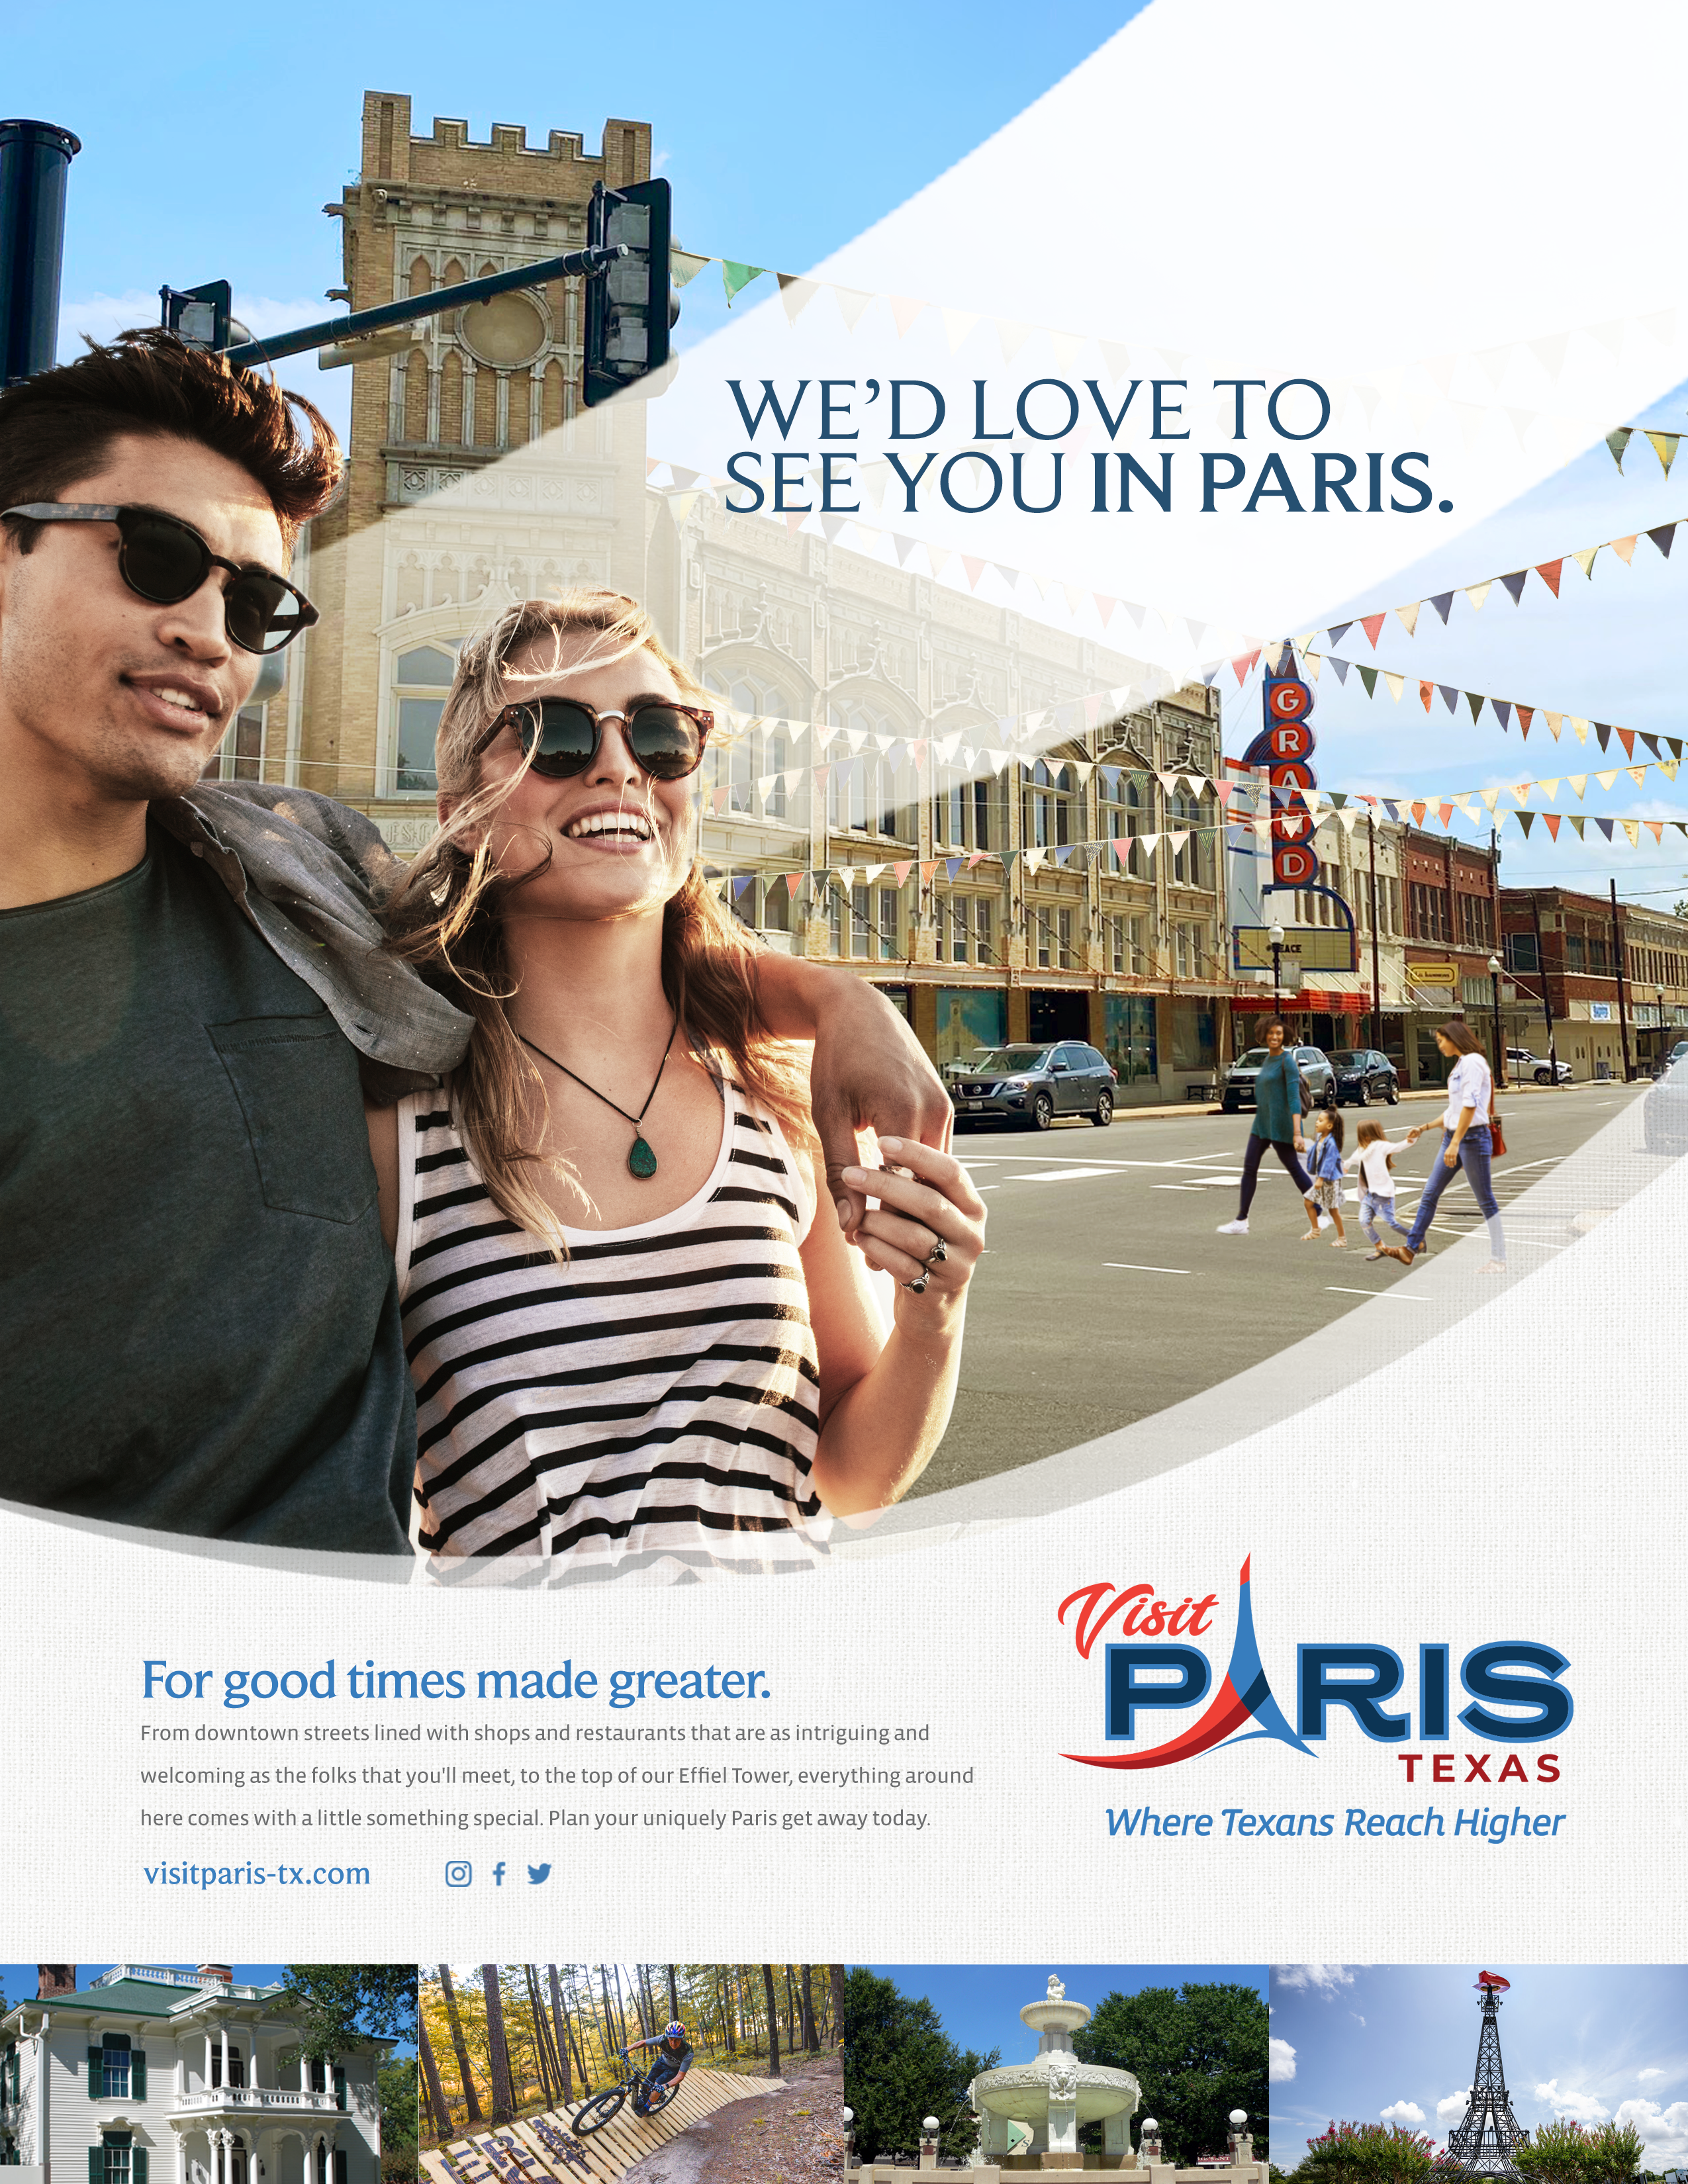 Paris, Texas tourism look full page ad